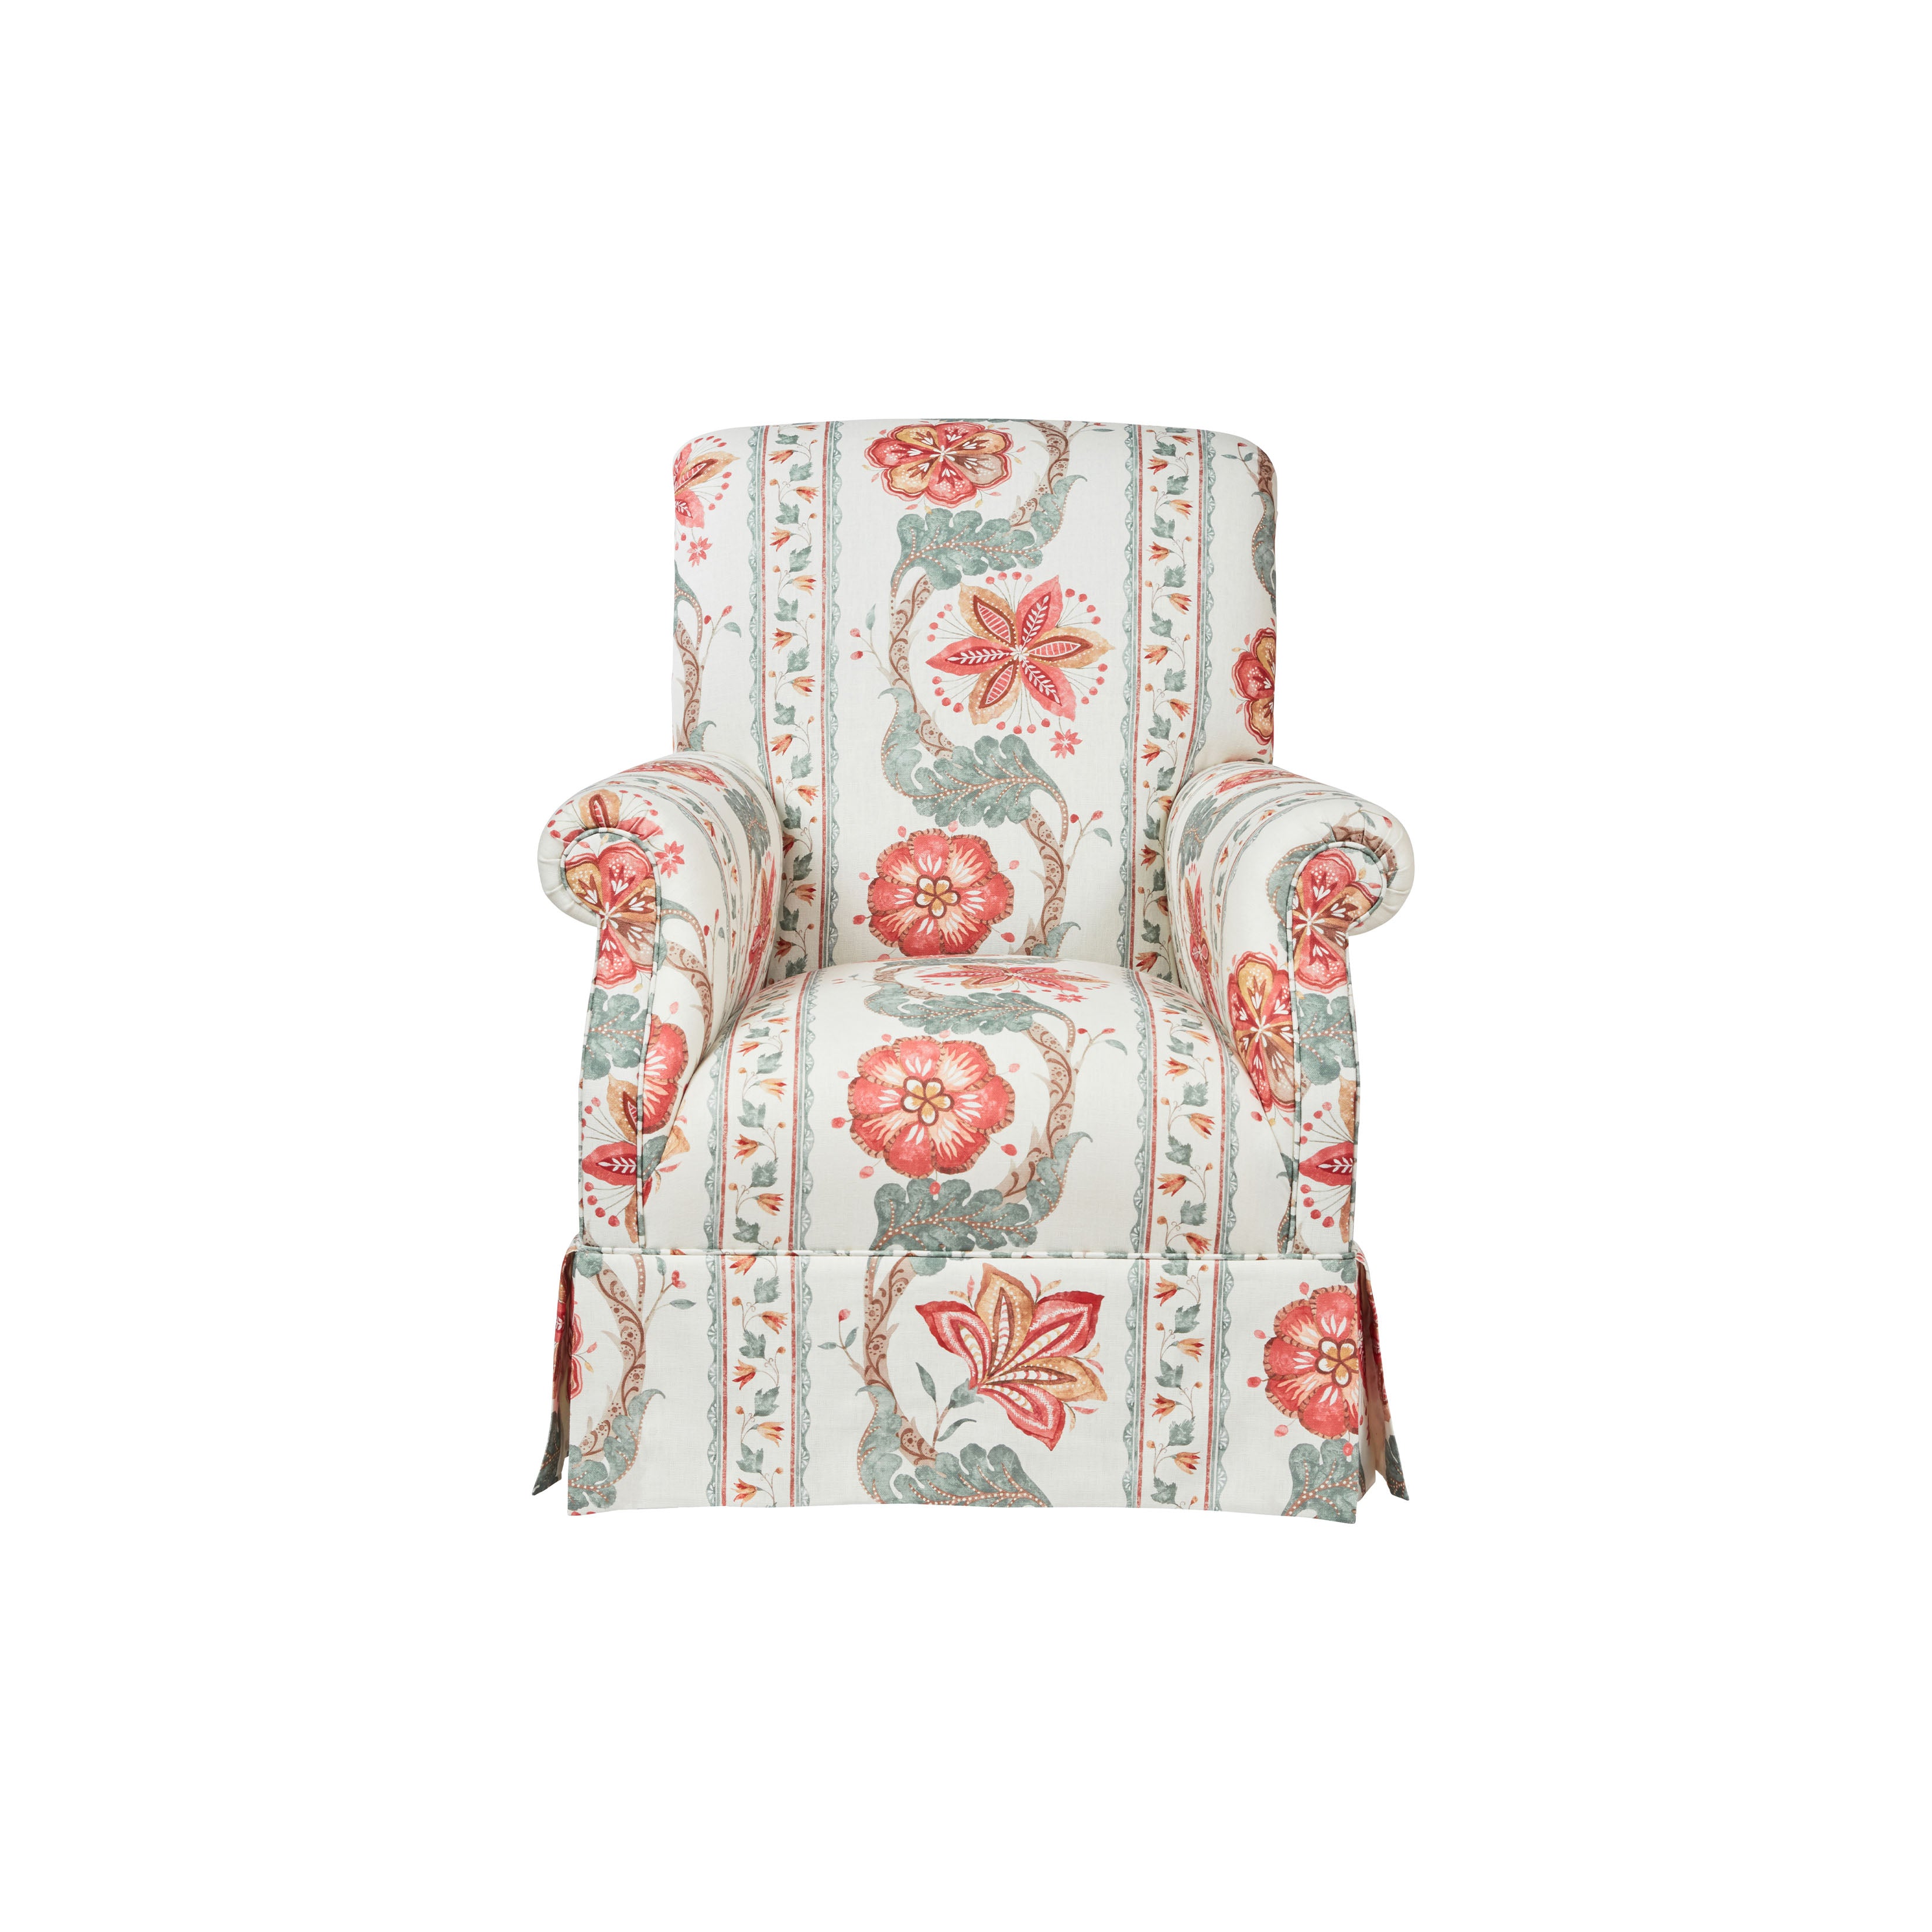 Nina Campbell Elizabeth Barrett Browning Armchair in Clermont with Valance